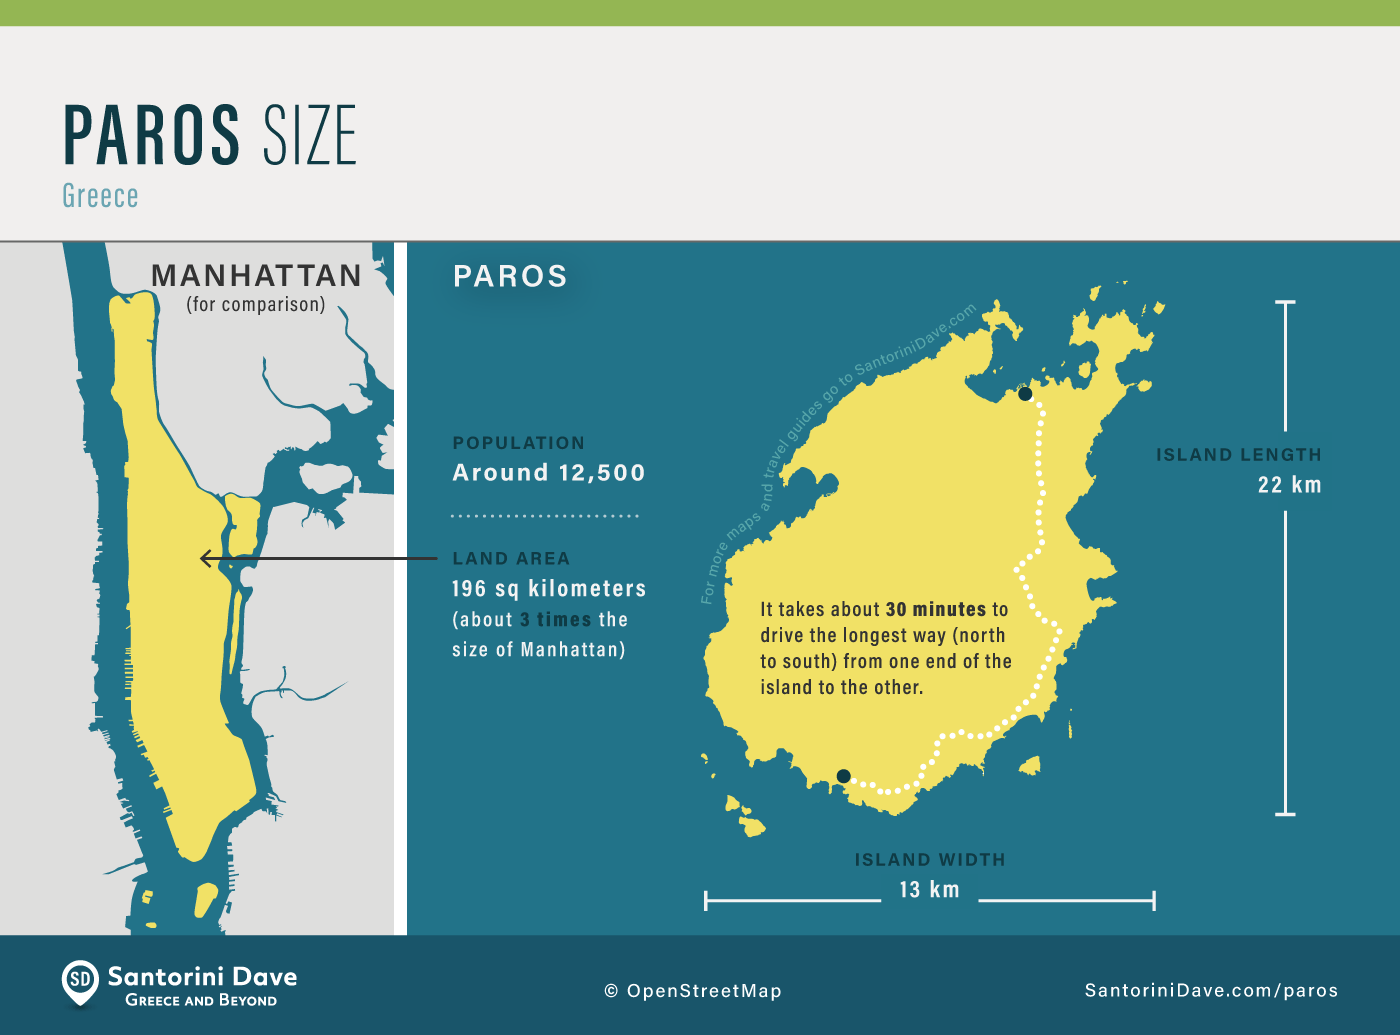 Map showing the size of Paros, Greece, relative to the size of Manhattan